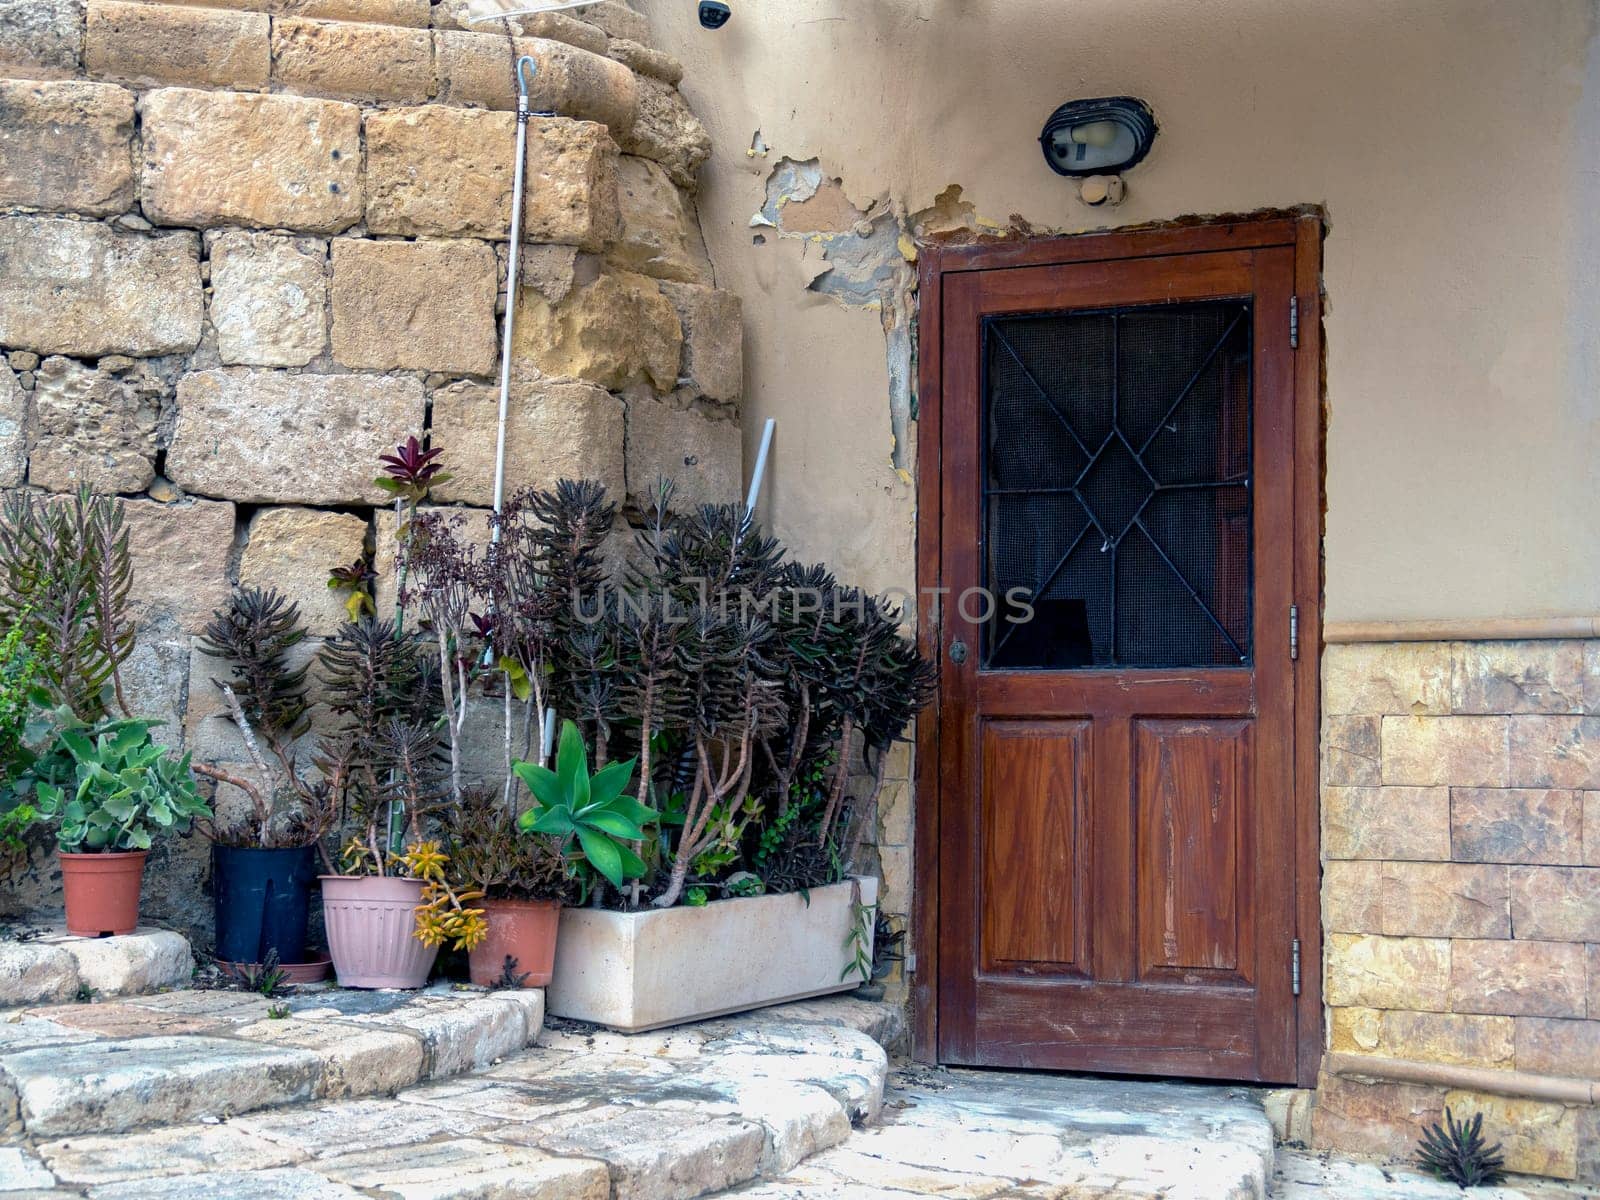 close up retro style old house door of Mediterranean architectural culture in Mediterranean island Malta. High quality photo